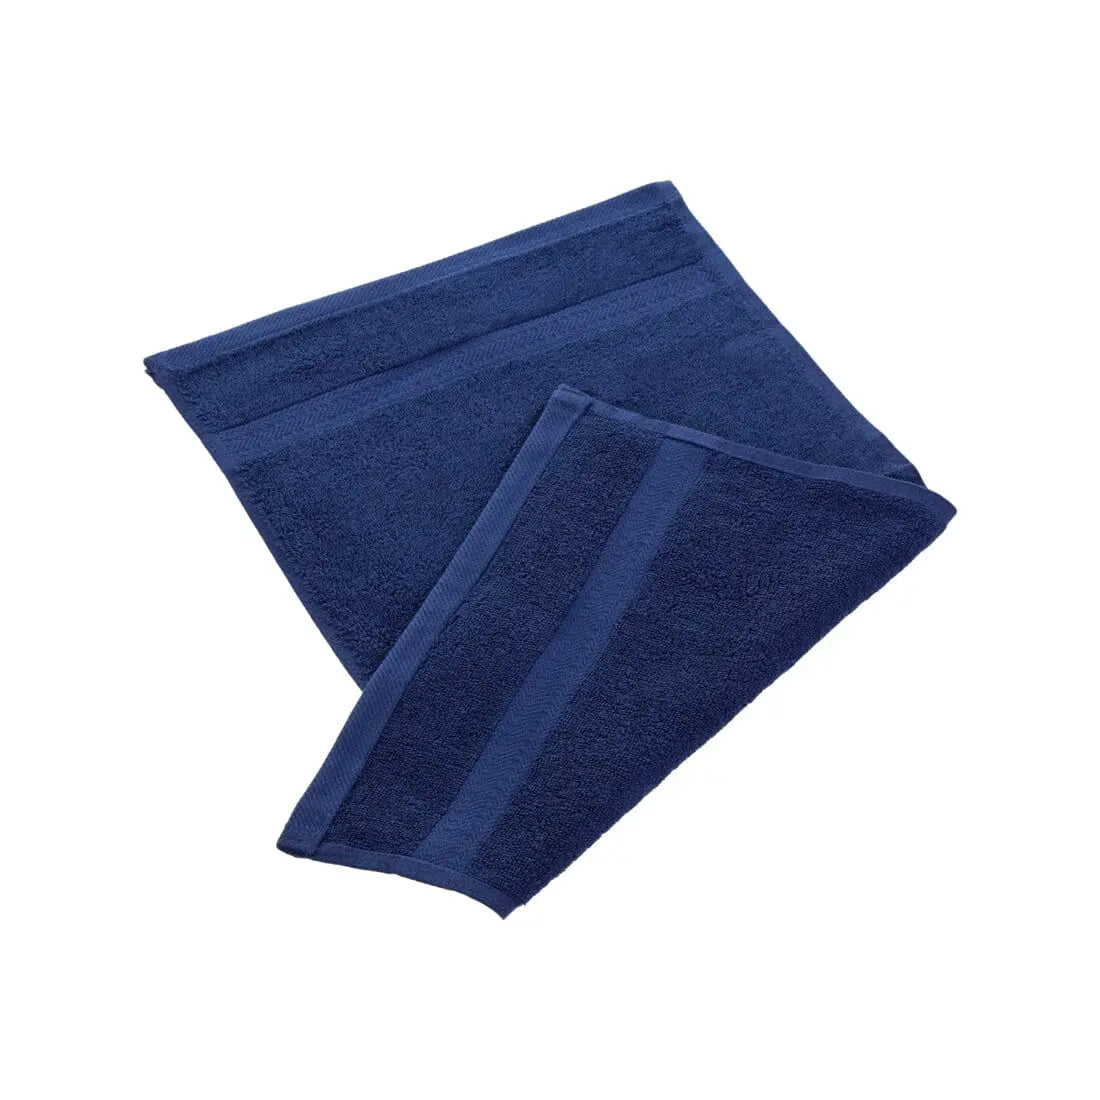 Navy egyptian cotton towel ideal for the gym